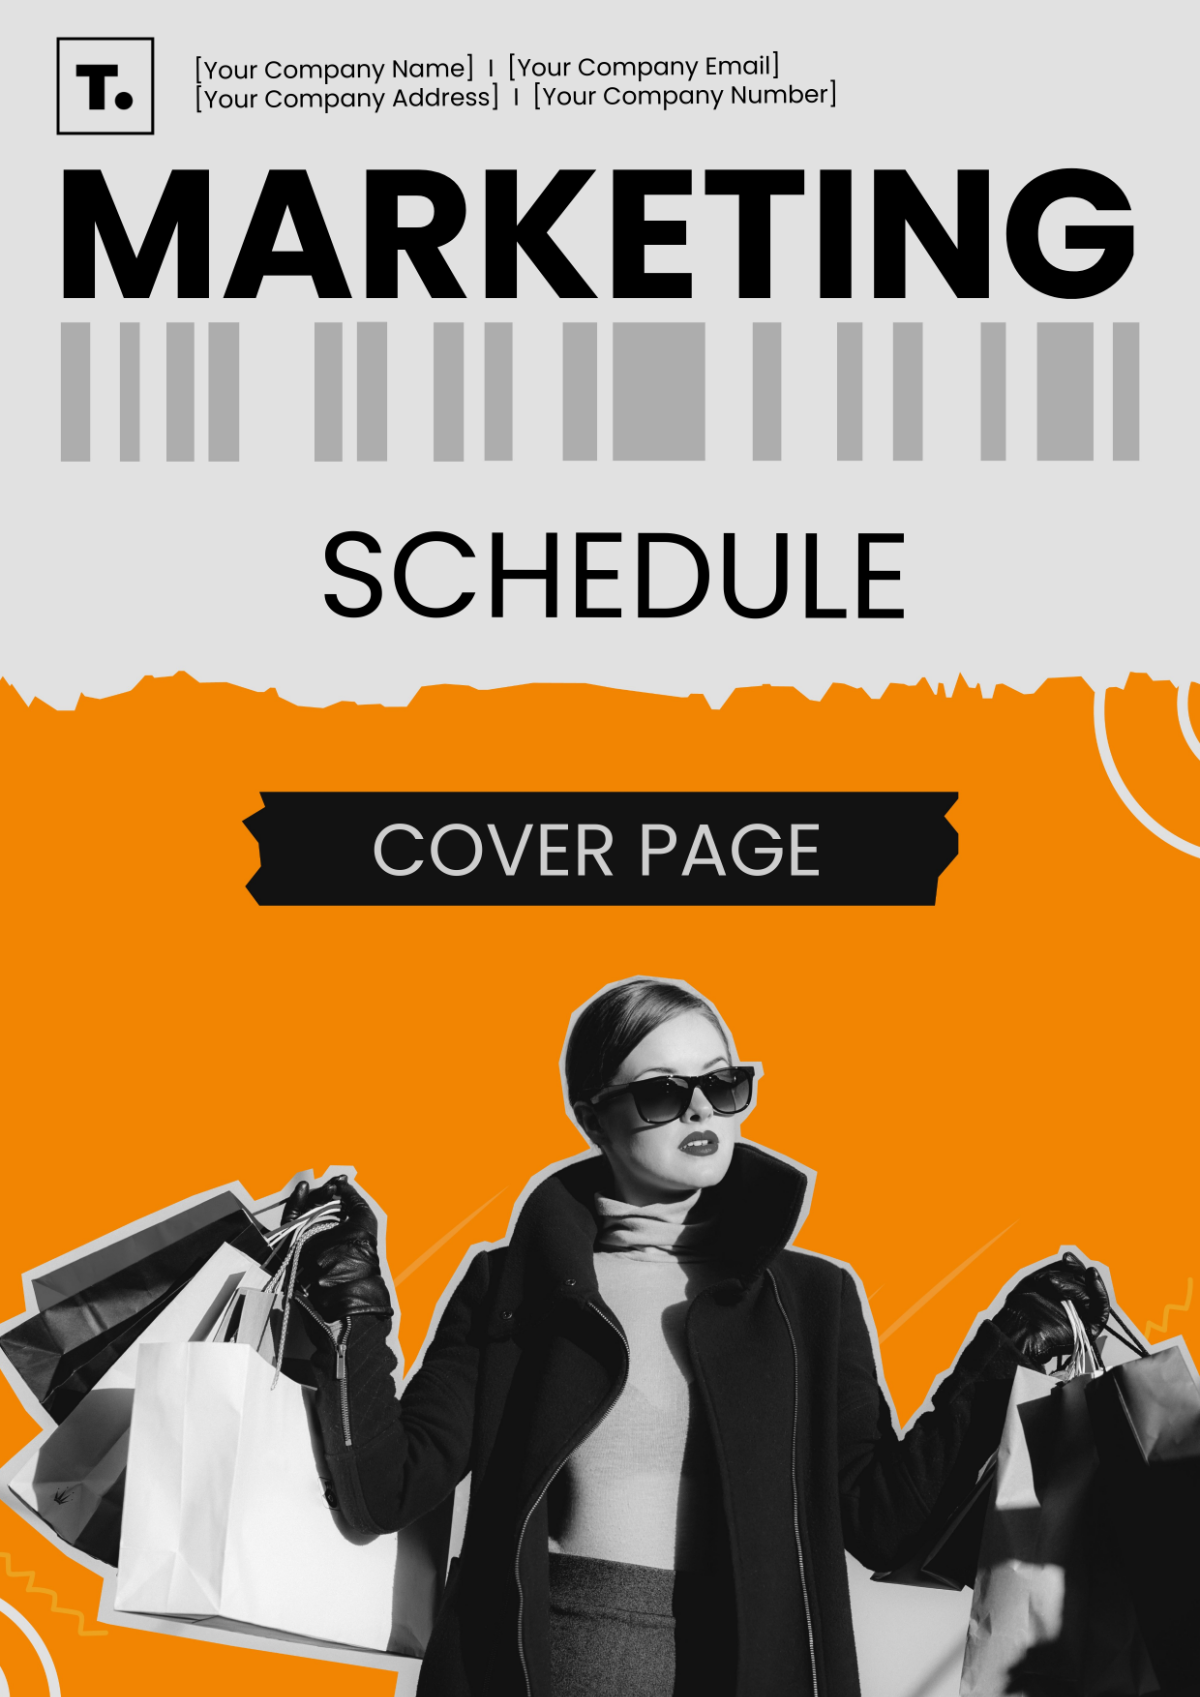 Marketing Schedule Cover Page